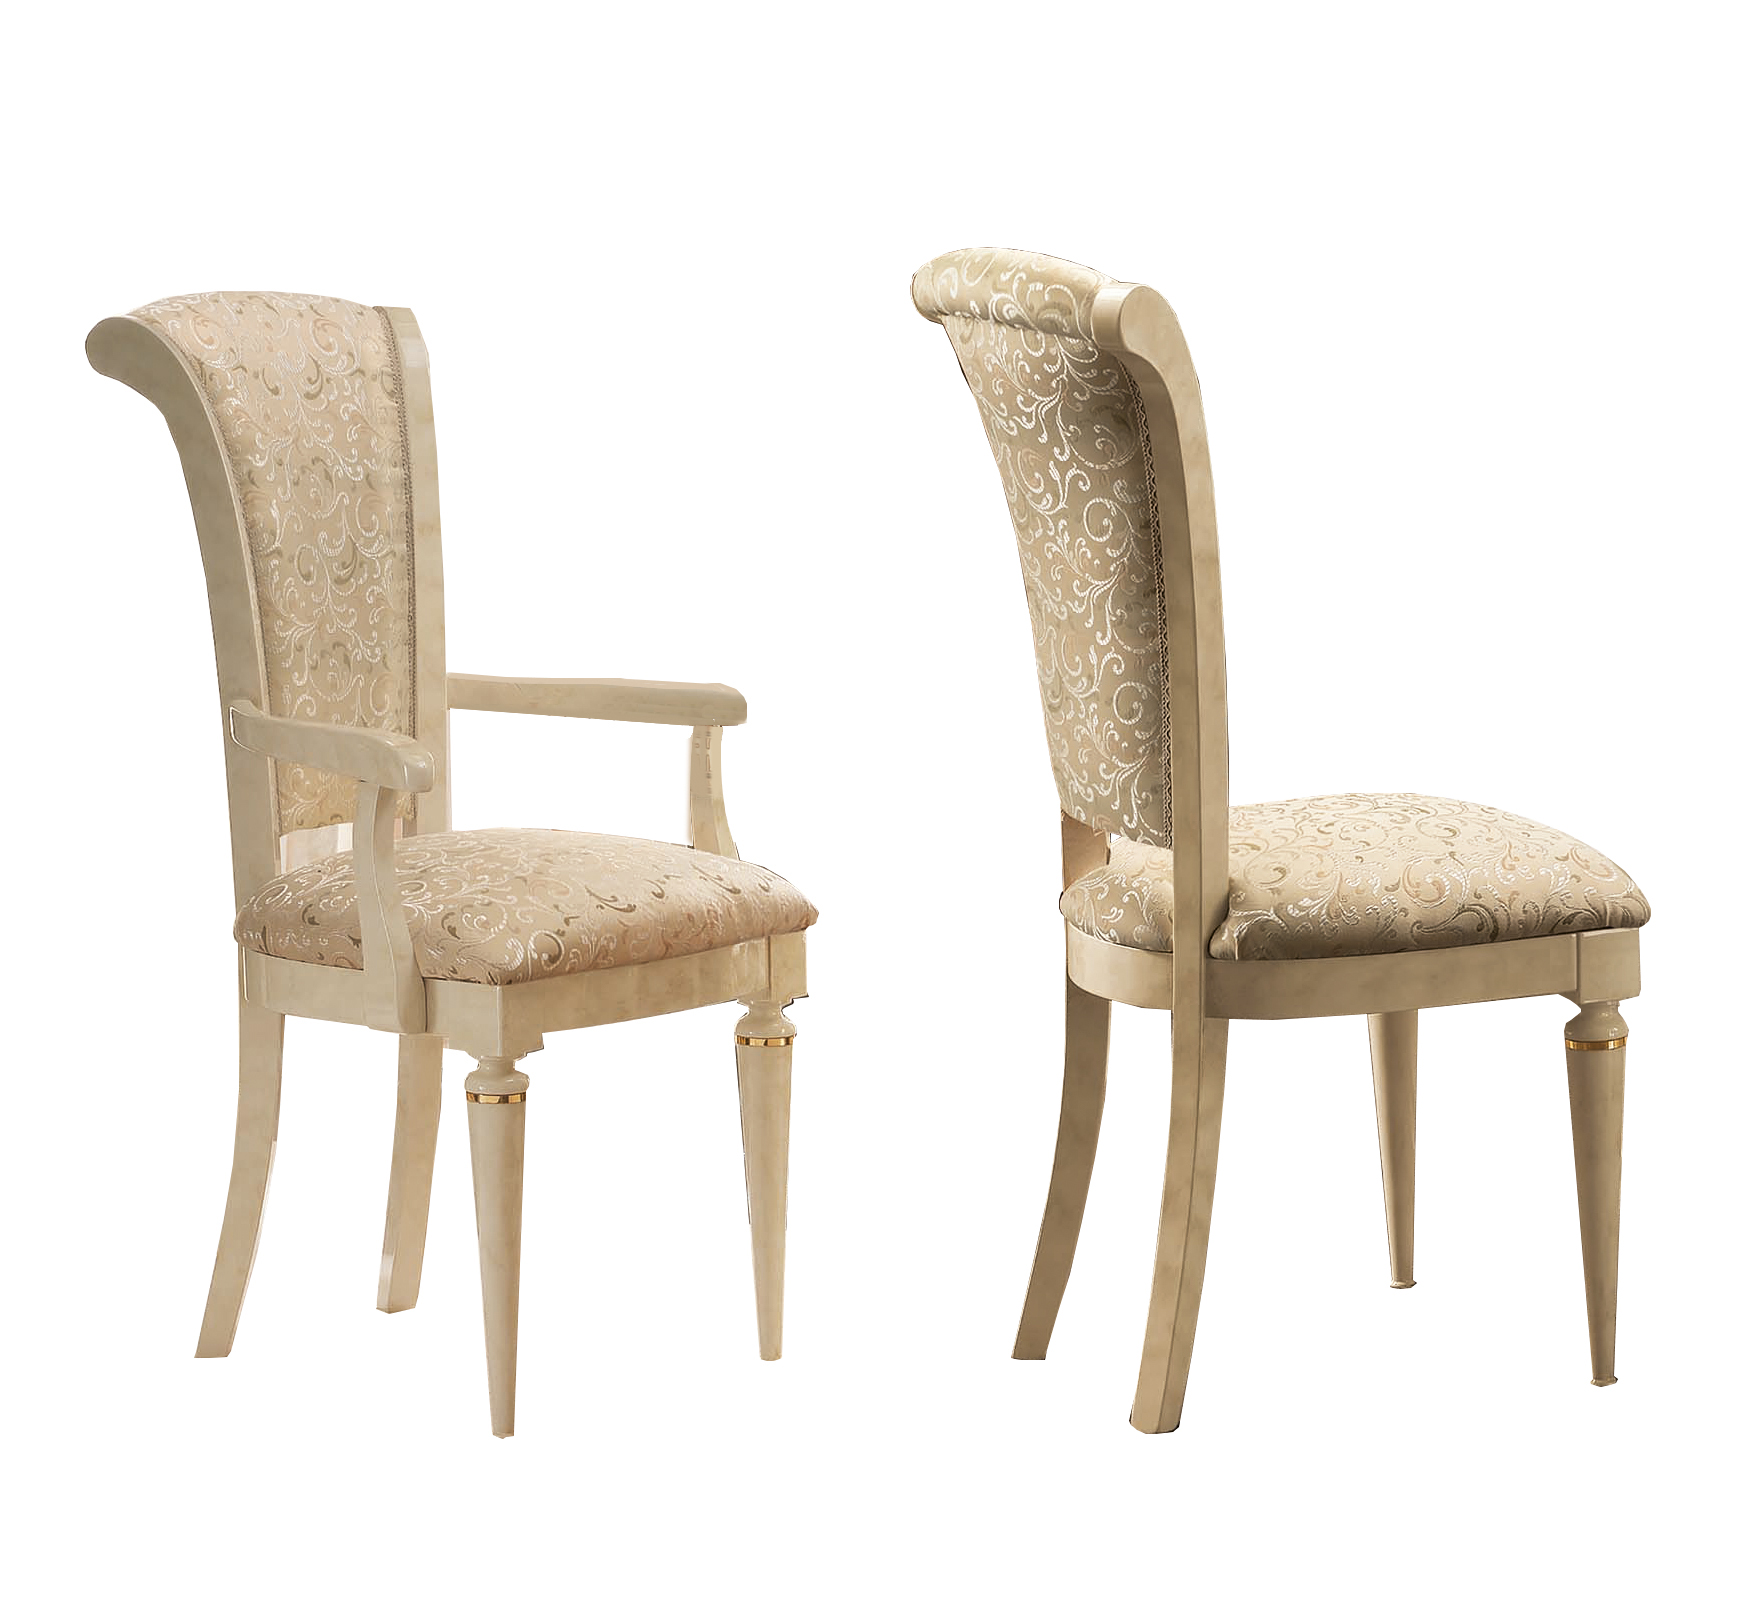 Living Room Furniture Sectionals Fantasia Chair by Arredoclassic